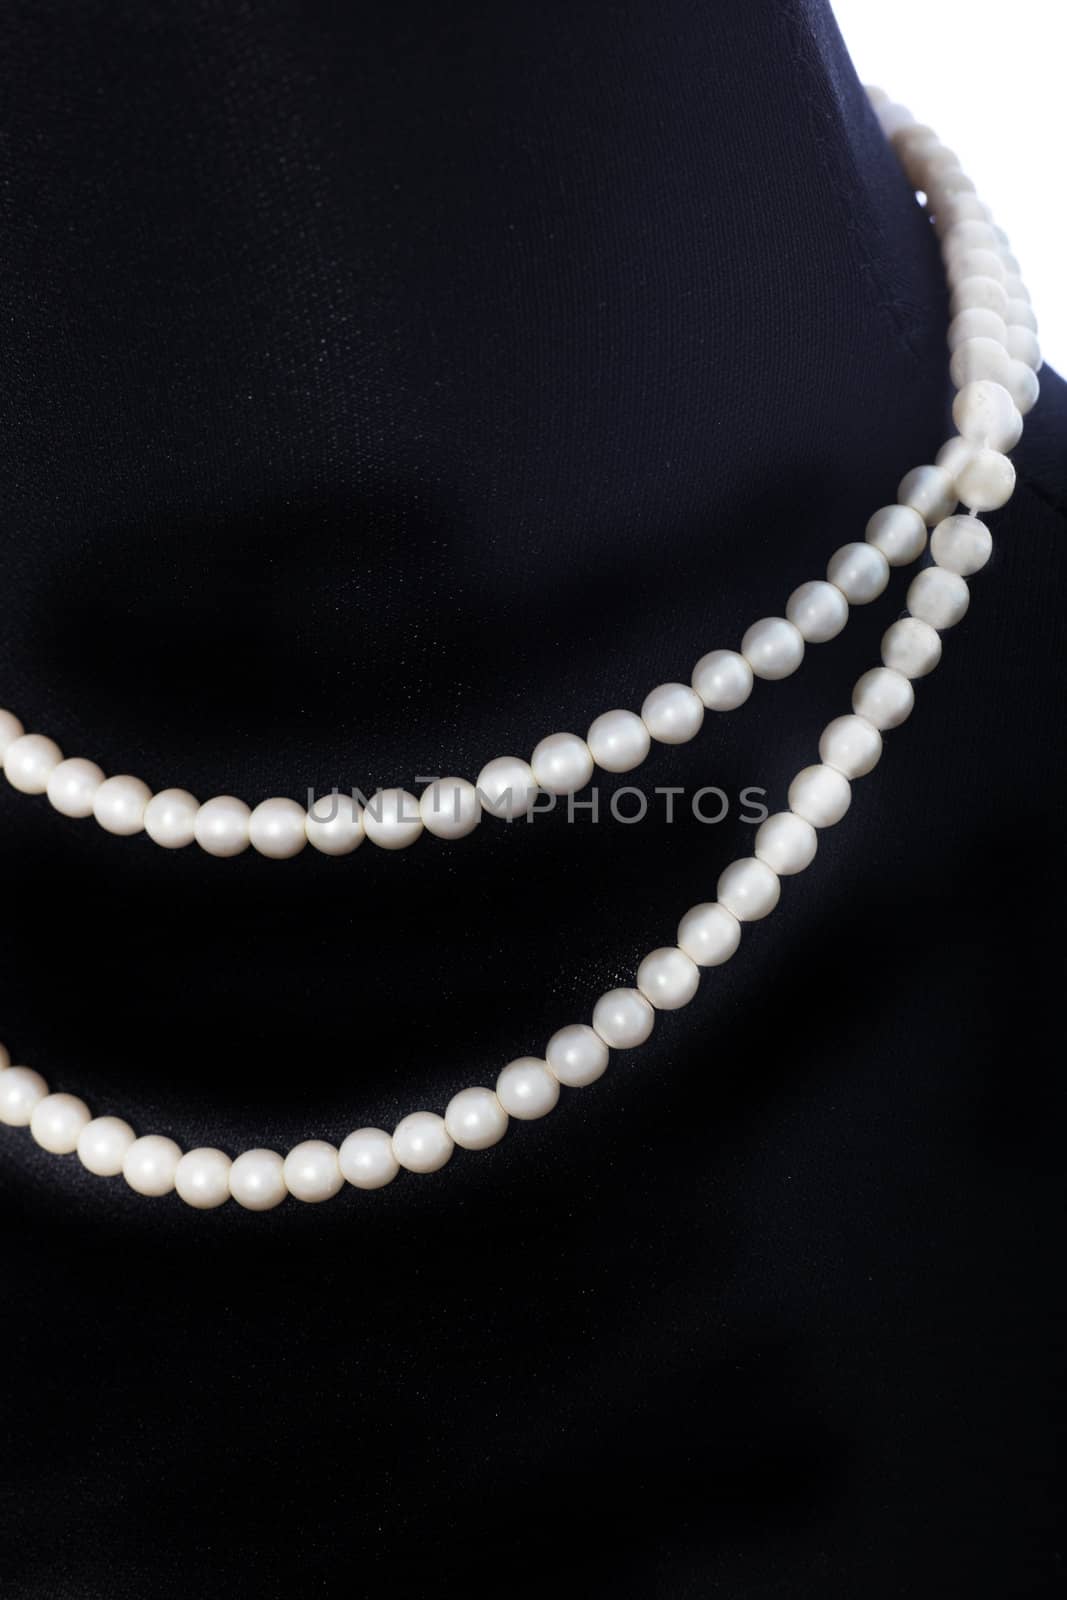 Double string of pearls by Farina6000